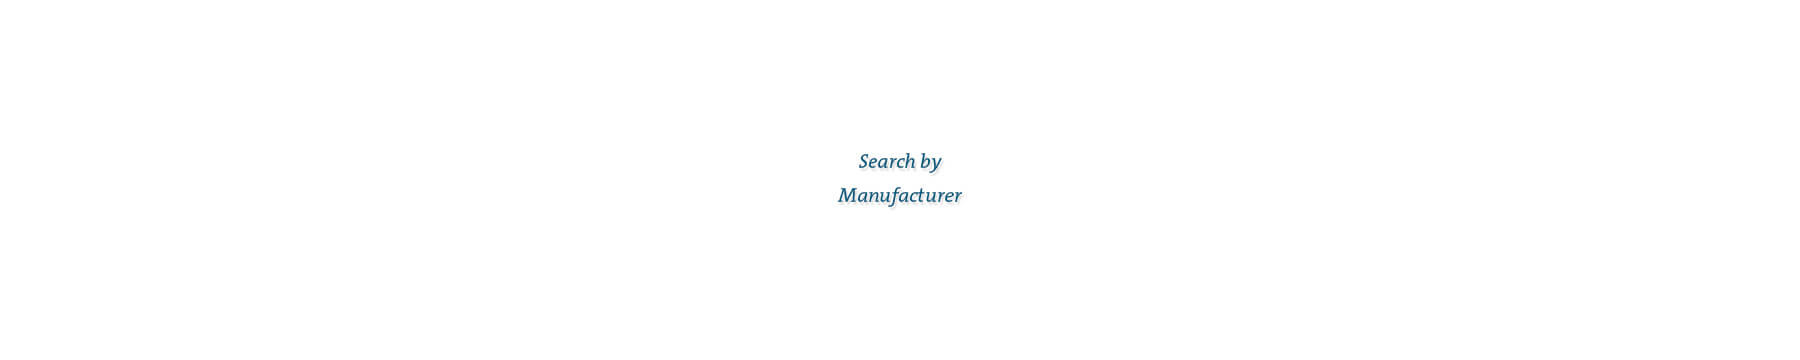 Search by Manufacturer